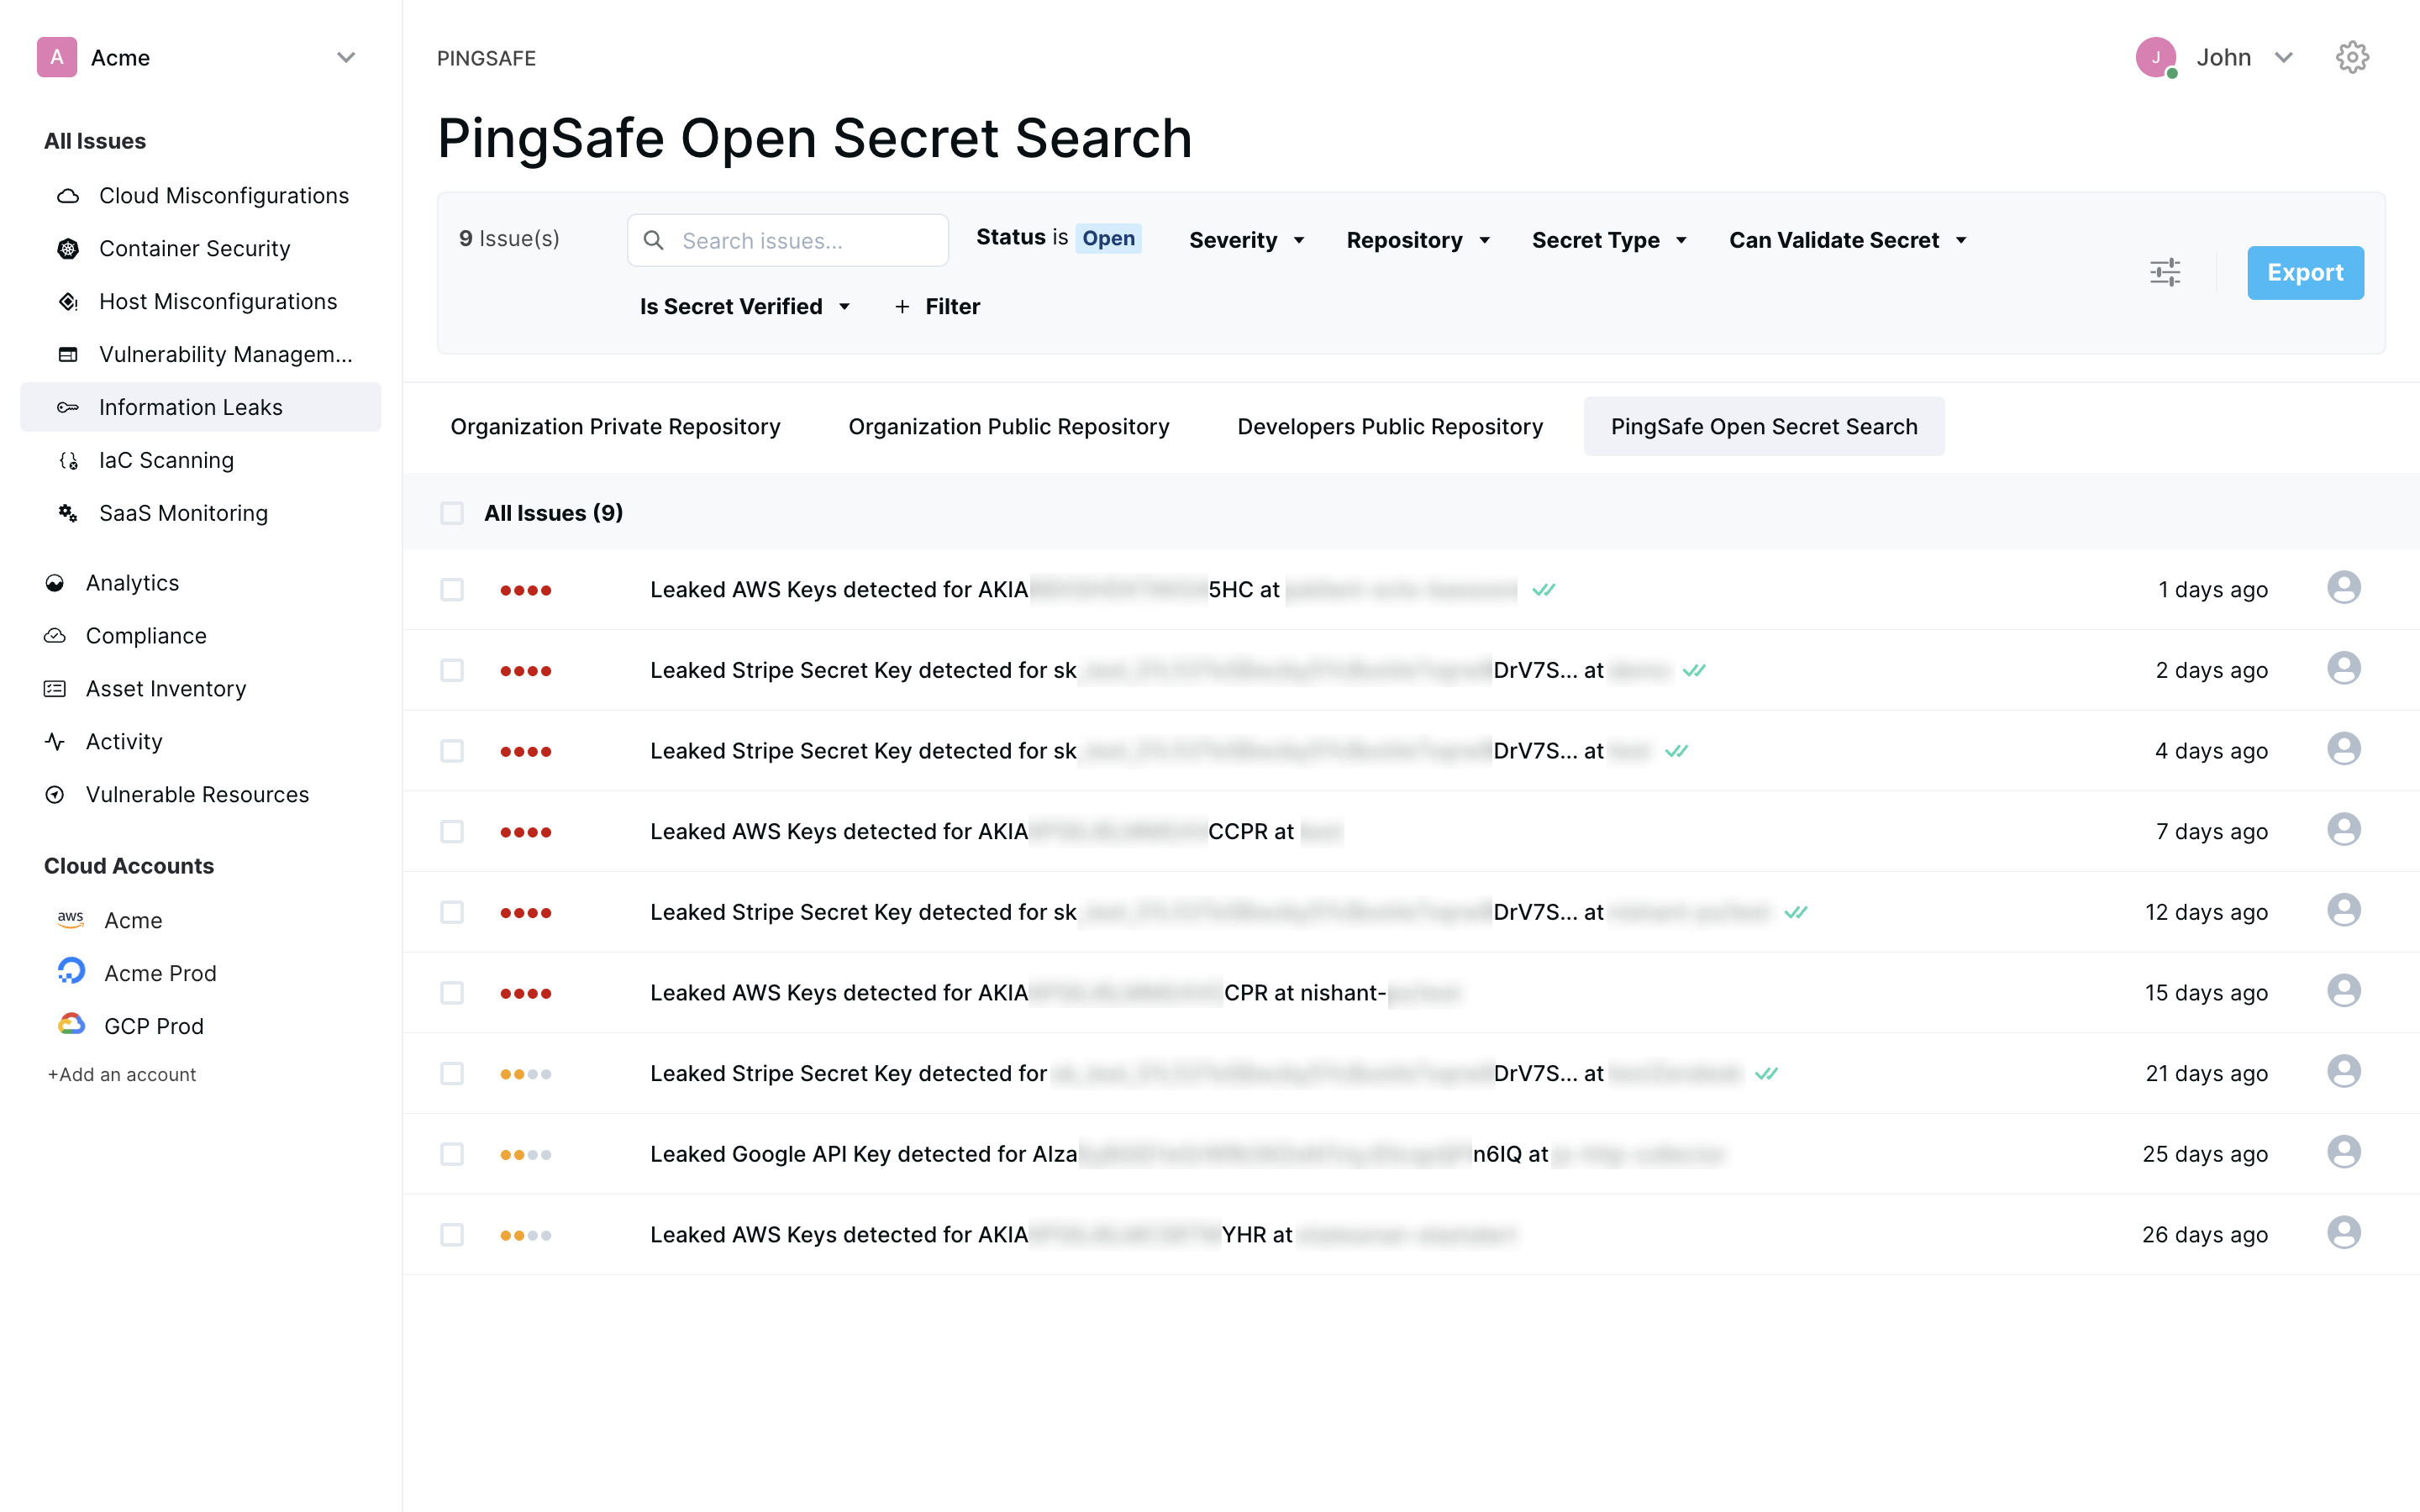 Through PingSafe’s Open Secret Search, we scan all public repositories across the web to alert you of any leaked secret and provide the required details related to its source.